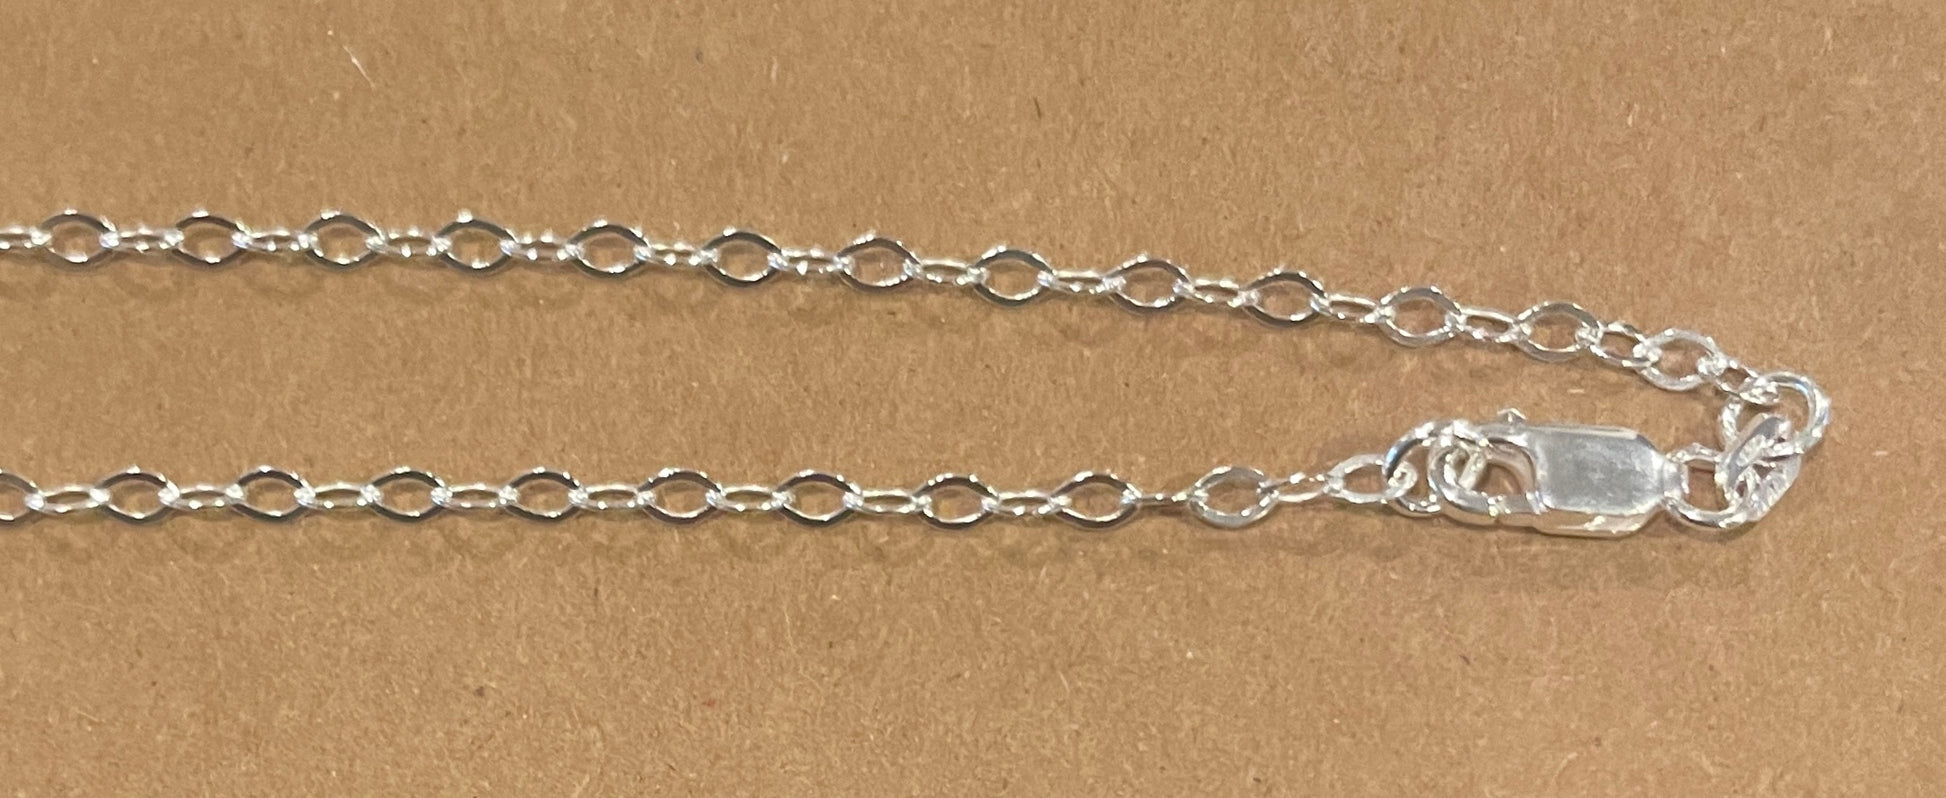 2.3mm flat cable sterling silver chain. 18" length. Made in Italy. 